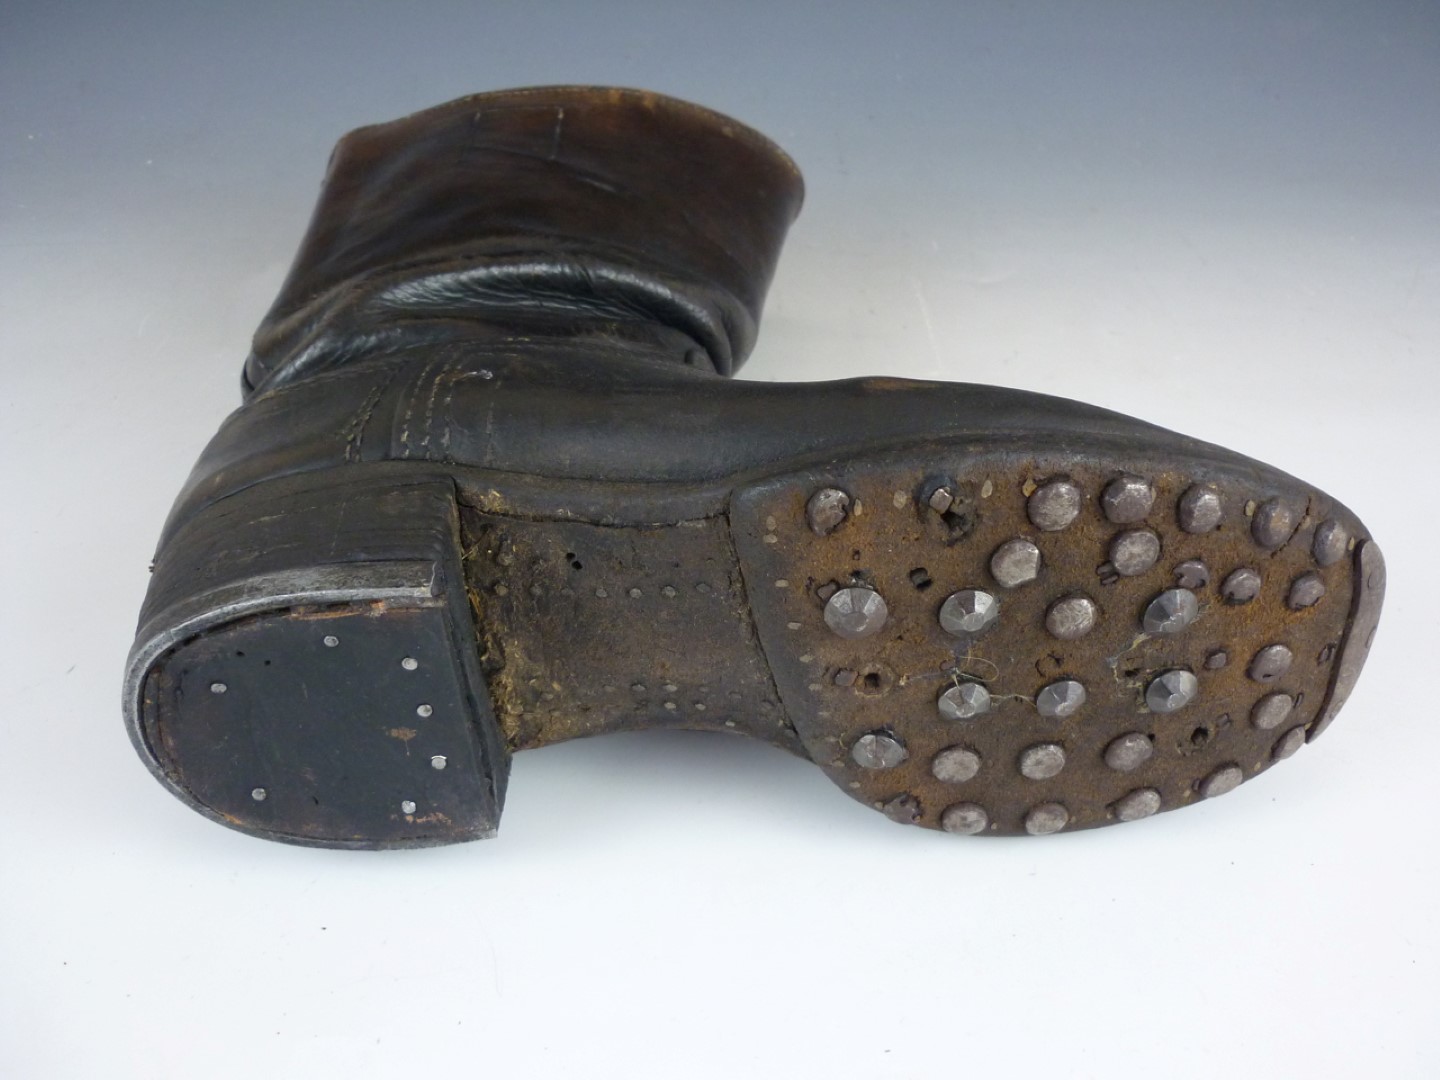 A pair of Second World War German Wehrmacht issue boots - Image 3 of 3